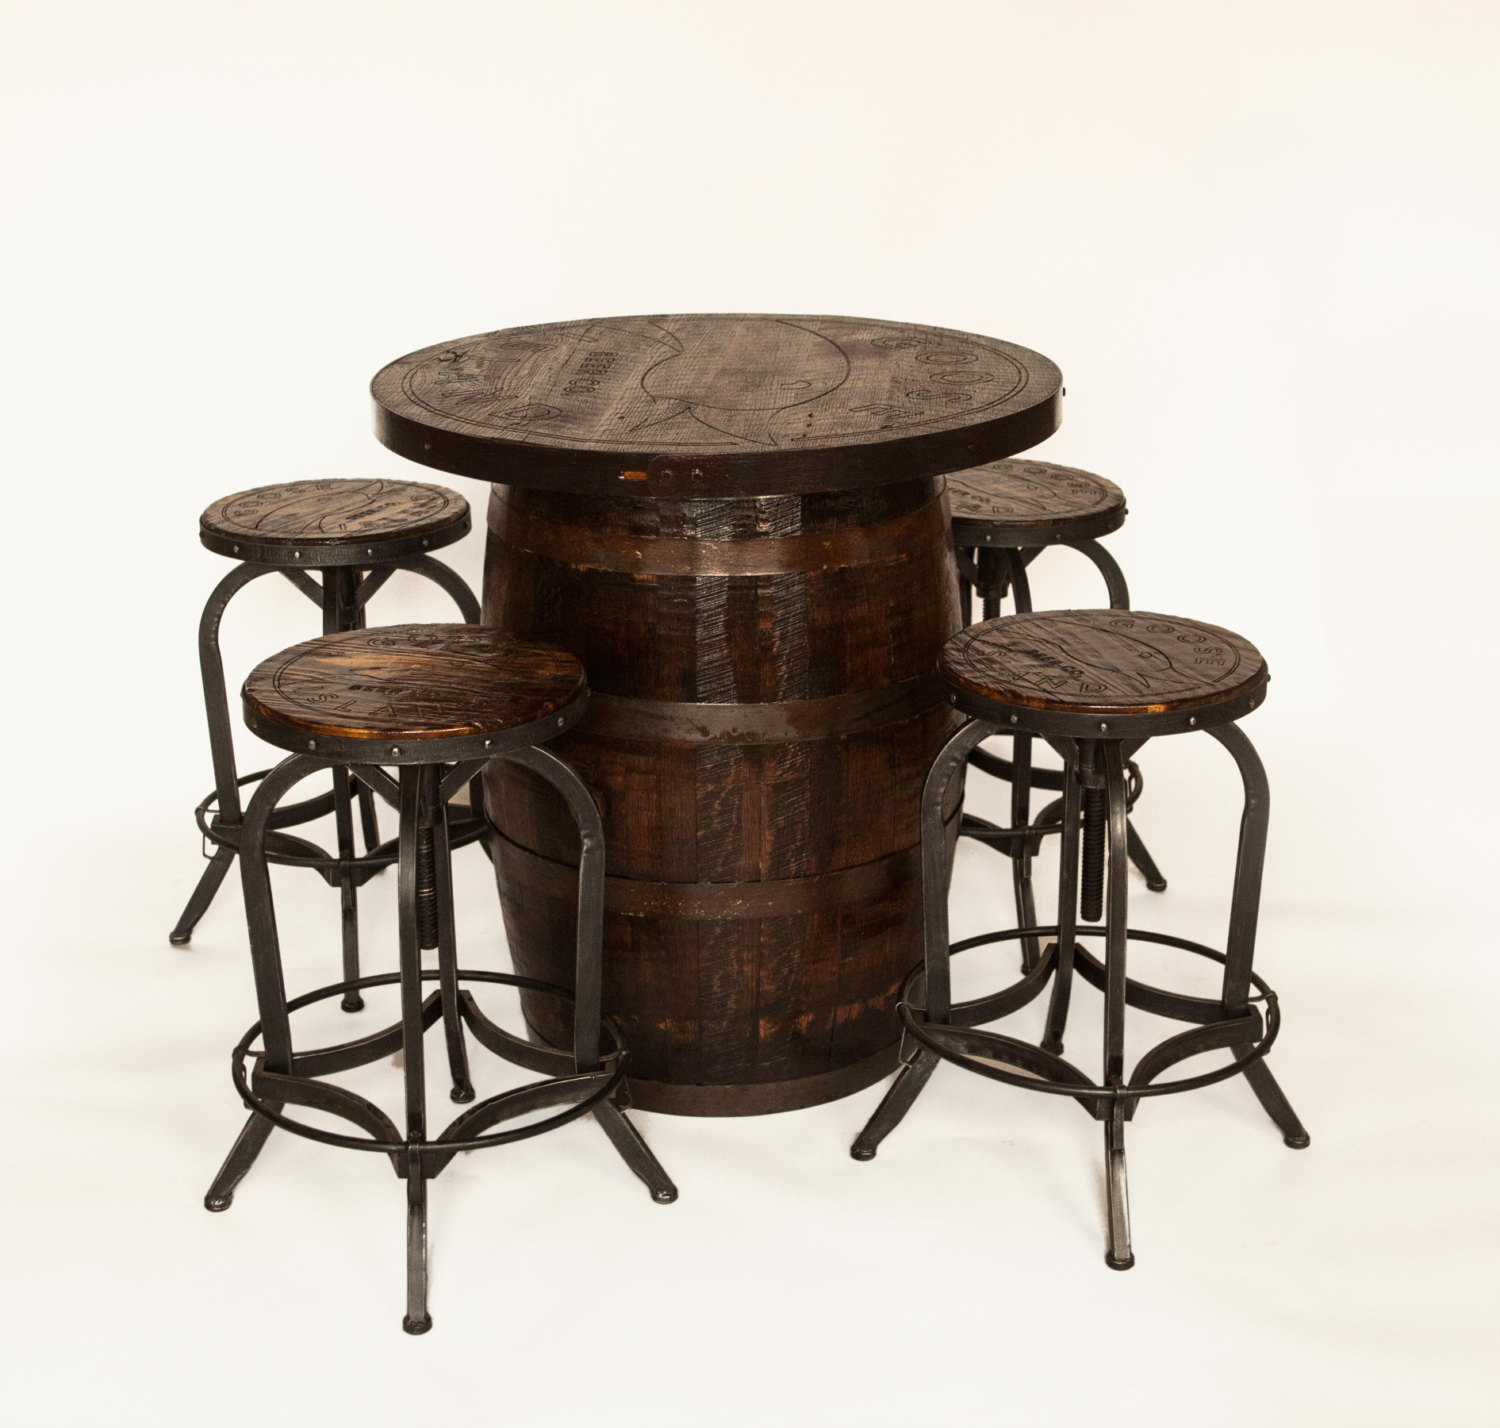 Reclaimed bourbon Barrel engraved personalized tables for your business or home with 4 matching stools